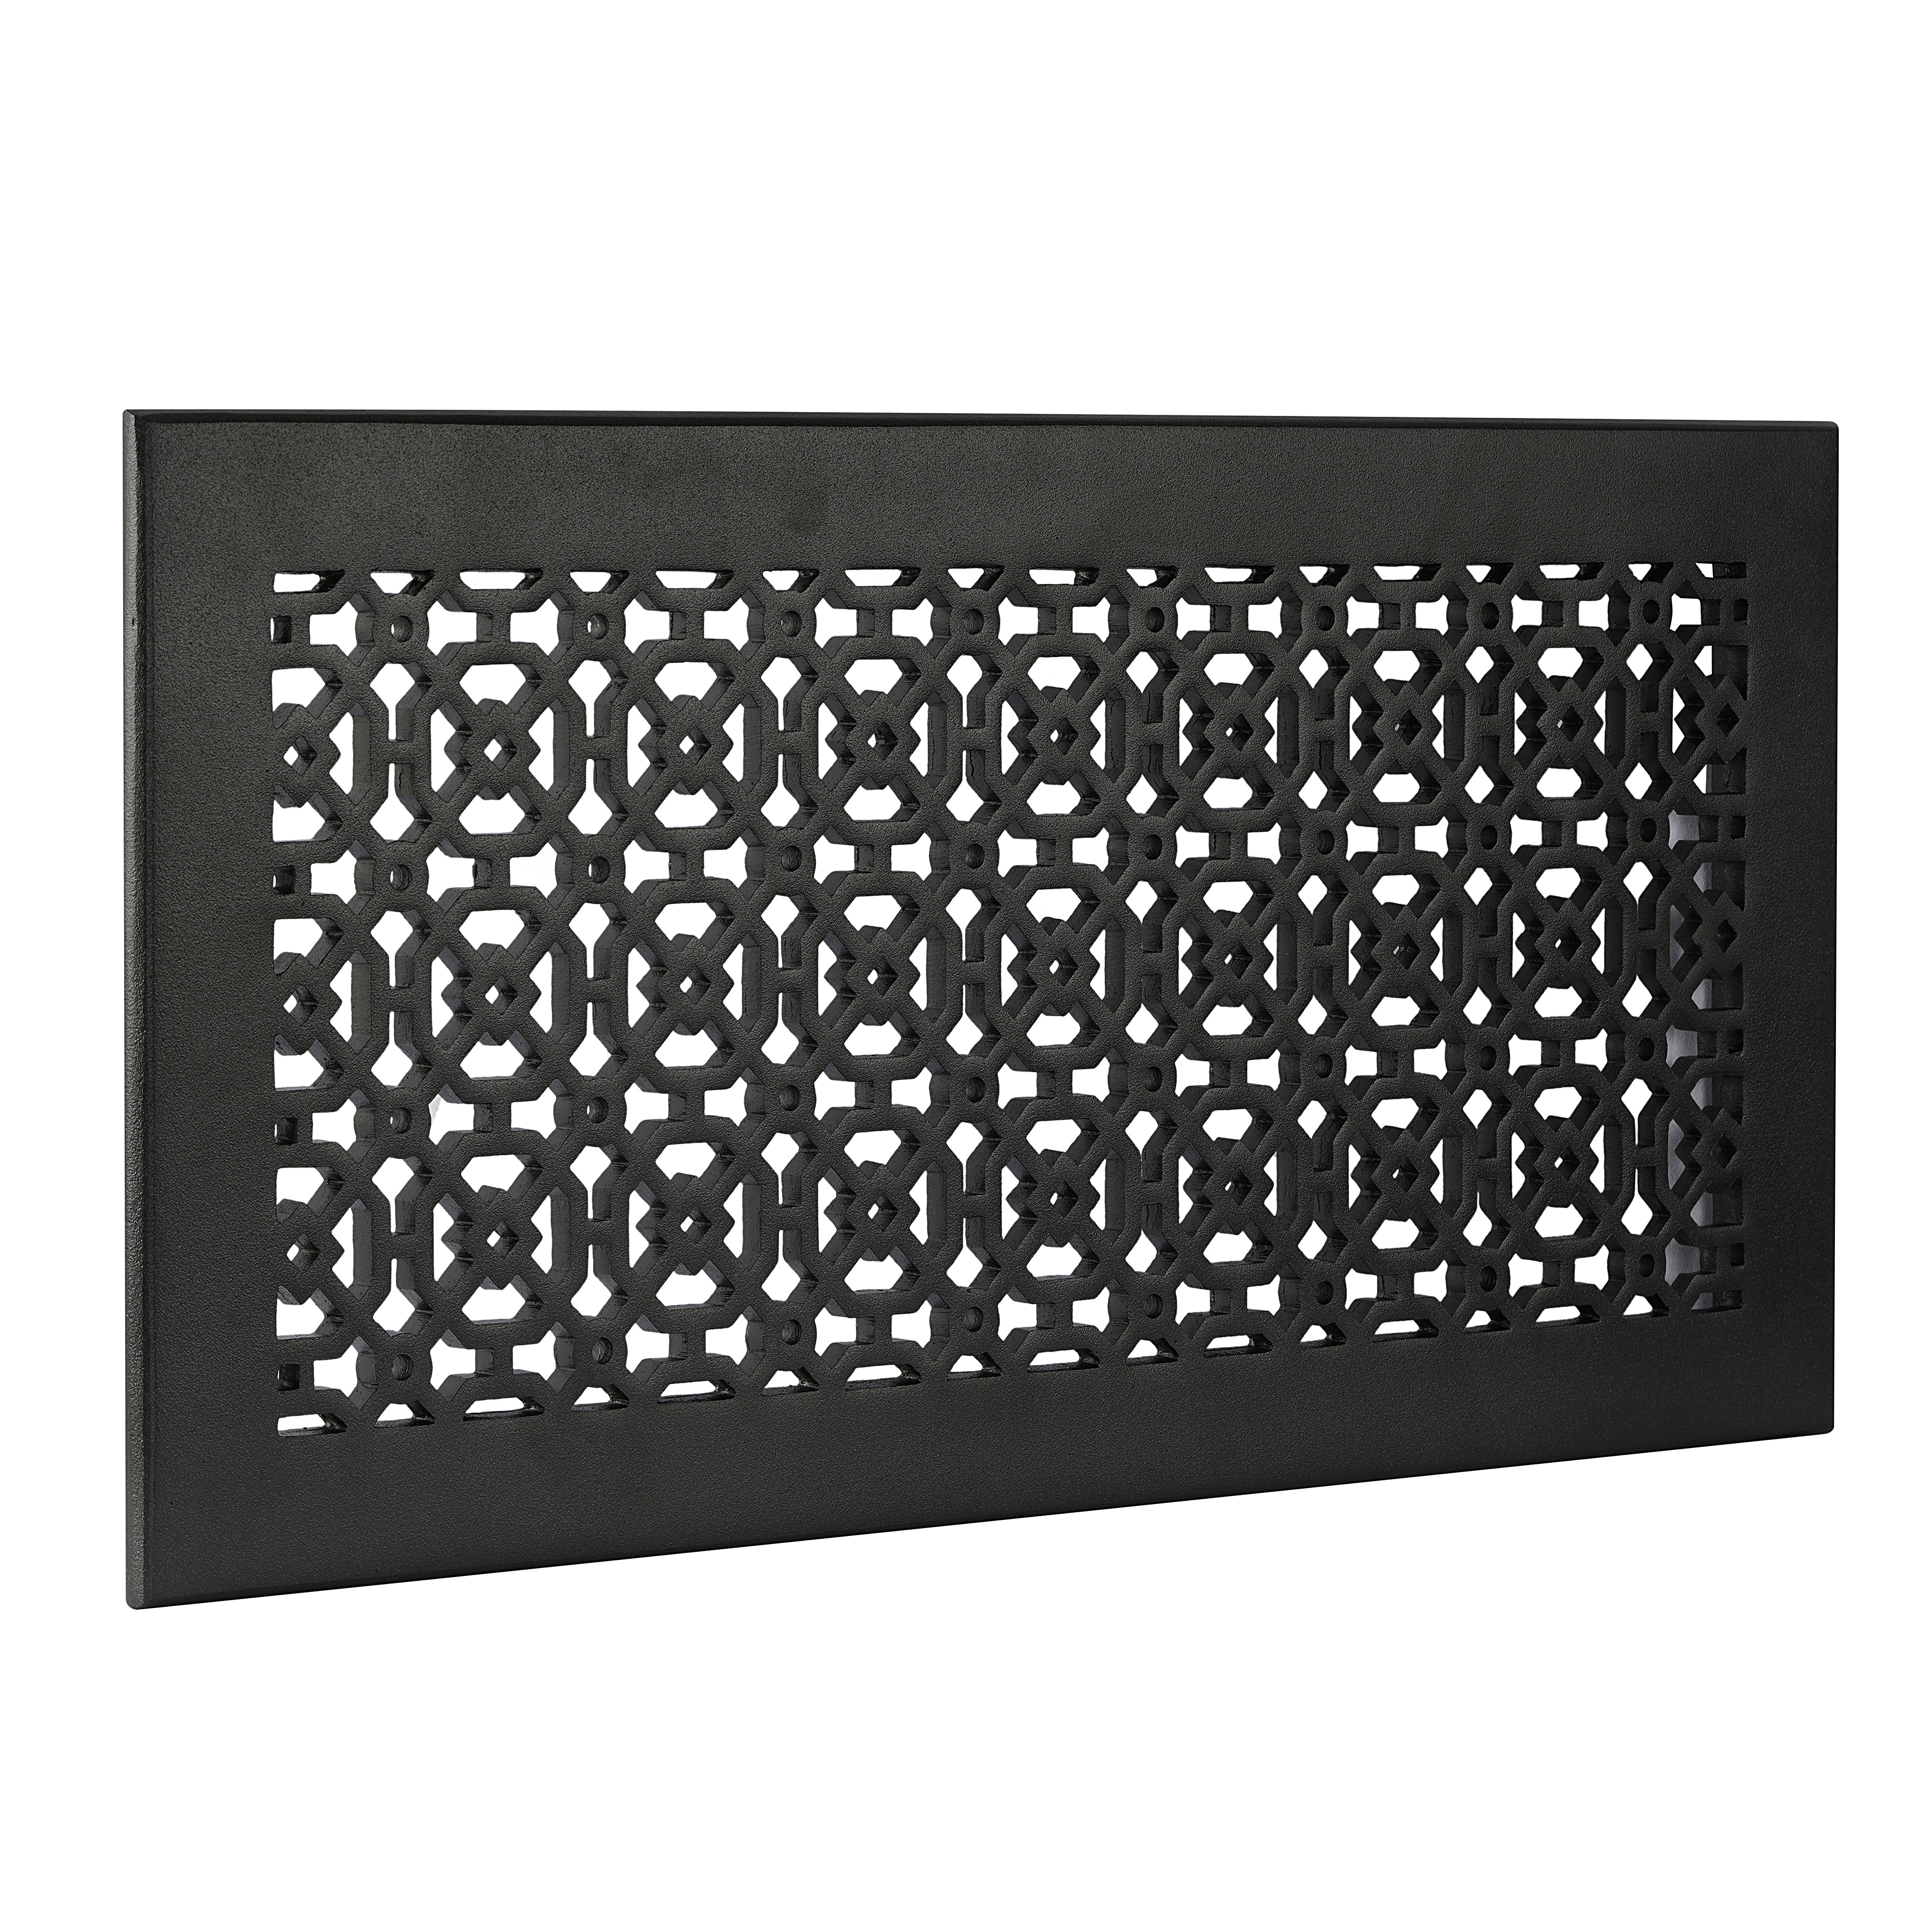 Achtek AIR RETURN 8"x18" Duct Opening (Overall Size 10"x20") | Heavy Cast Aluminum Air Grille HVAC Duct || Powder Coated